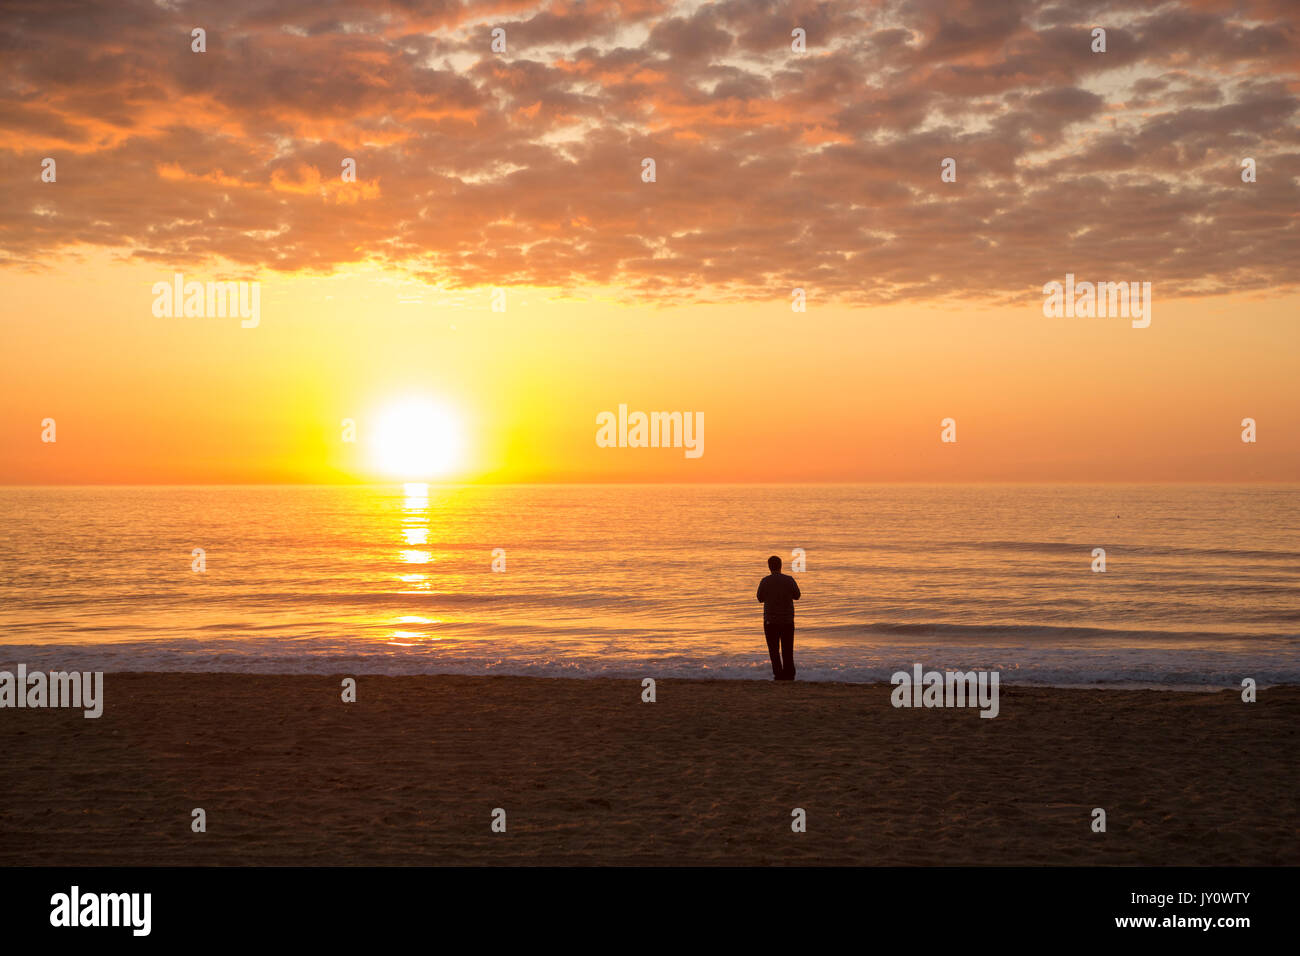 Silhouette of man standing on ocean beach at sunset Stock Photo